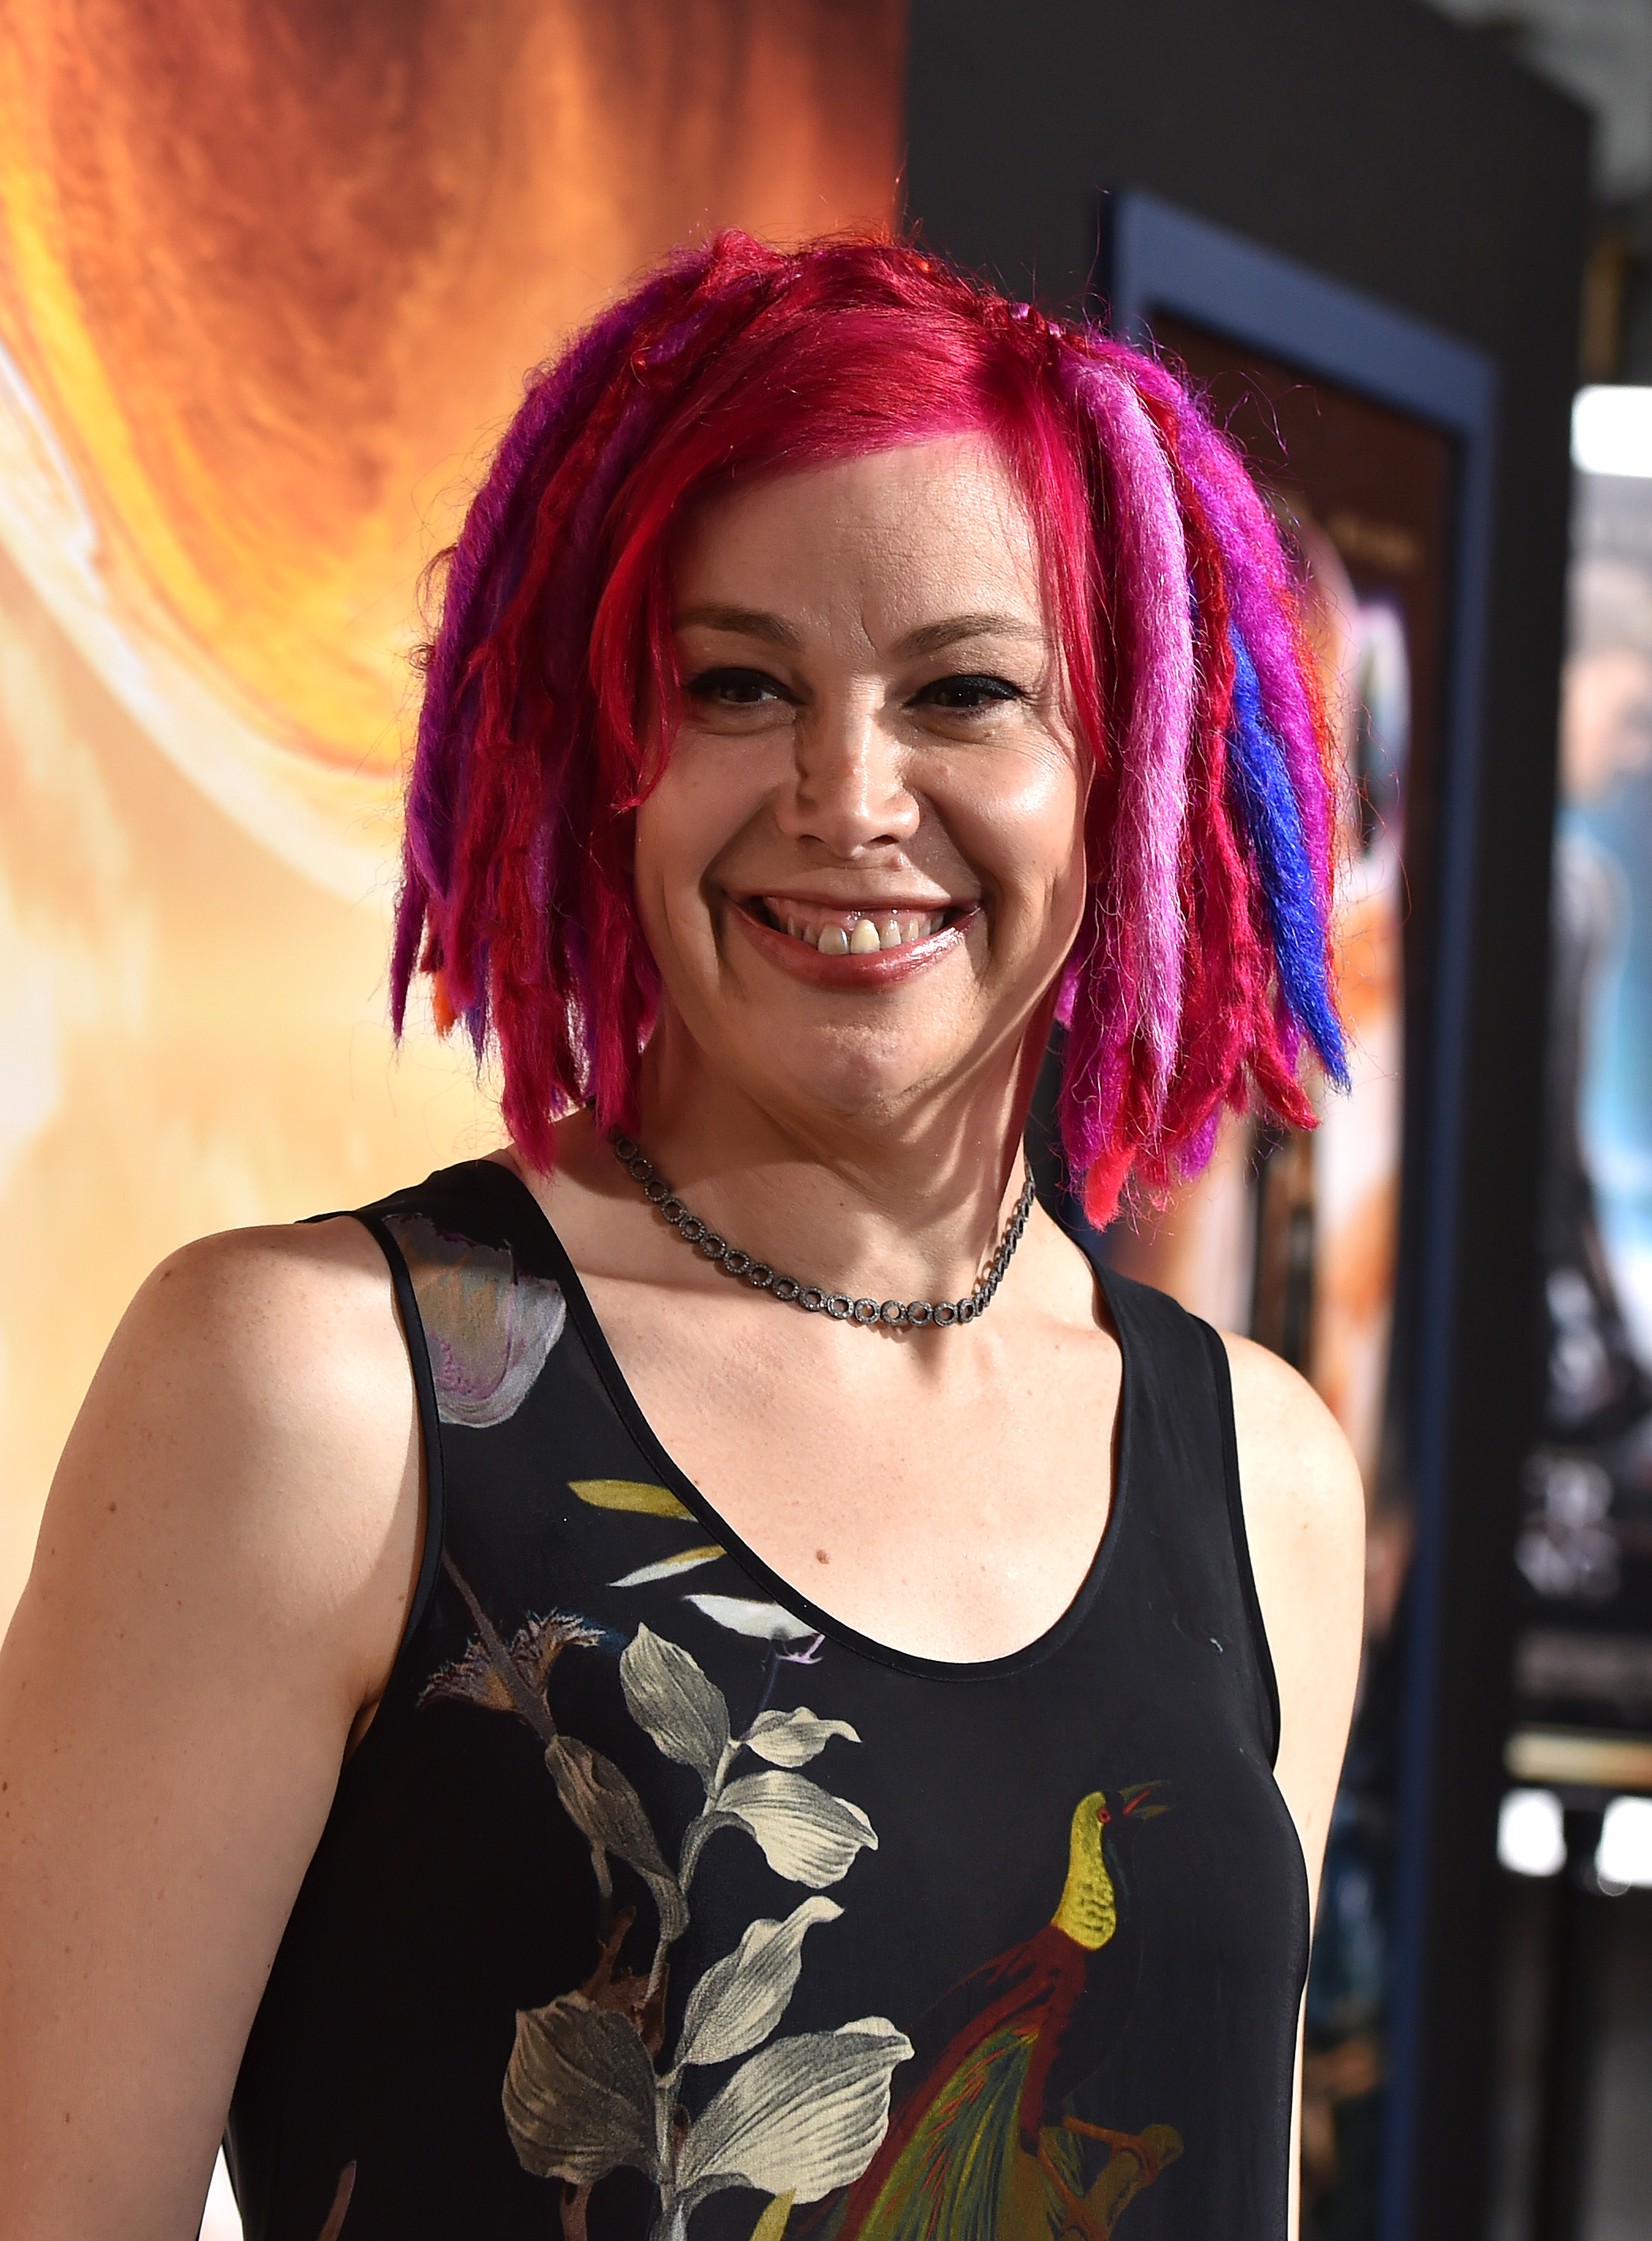 Lana Wachowski attends the premiere of "Jupiter Ascending," 2015 | Source: Getty Images